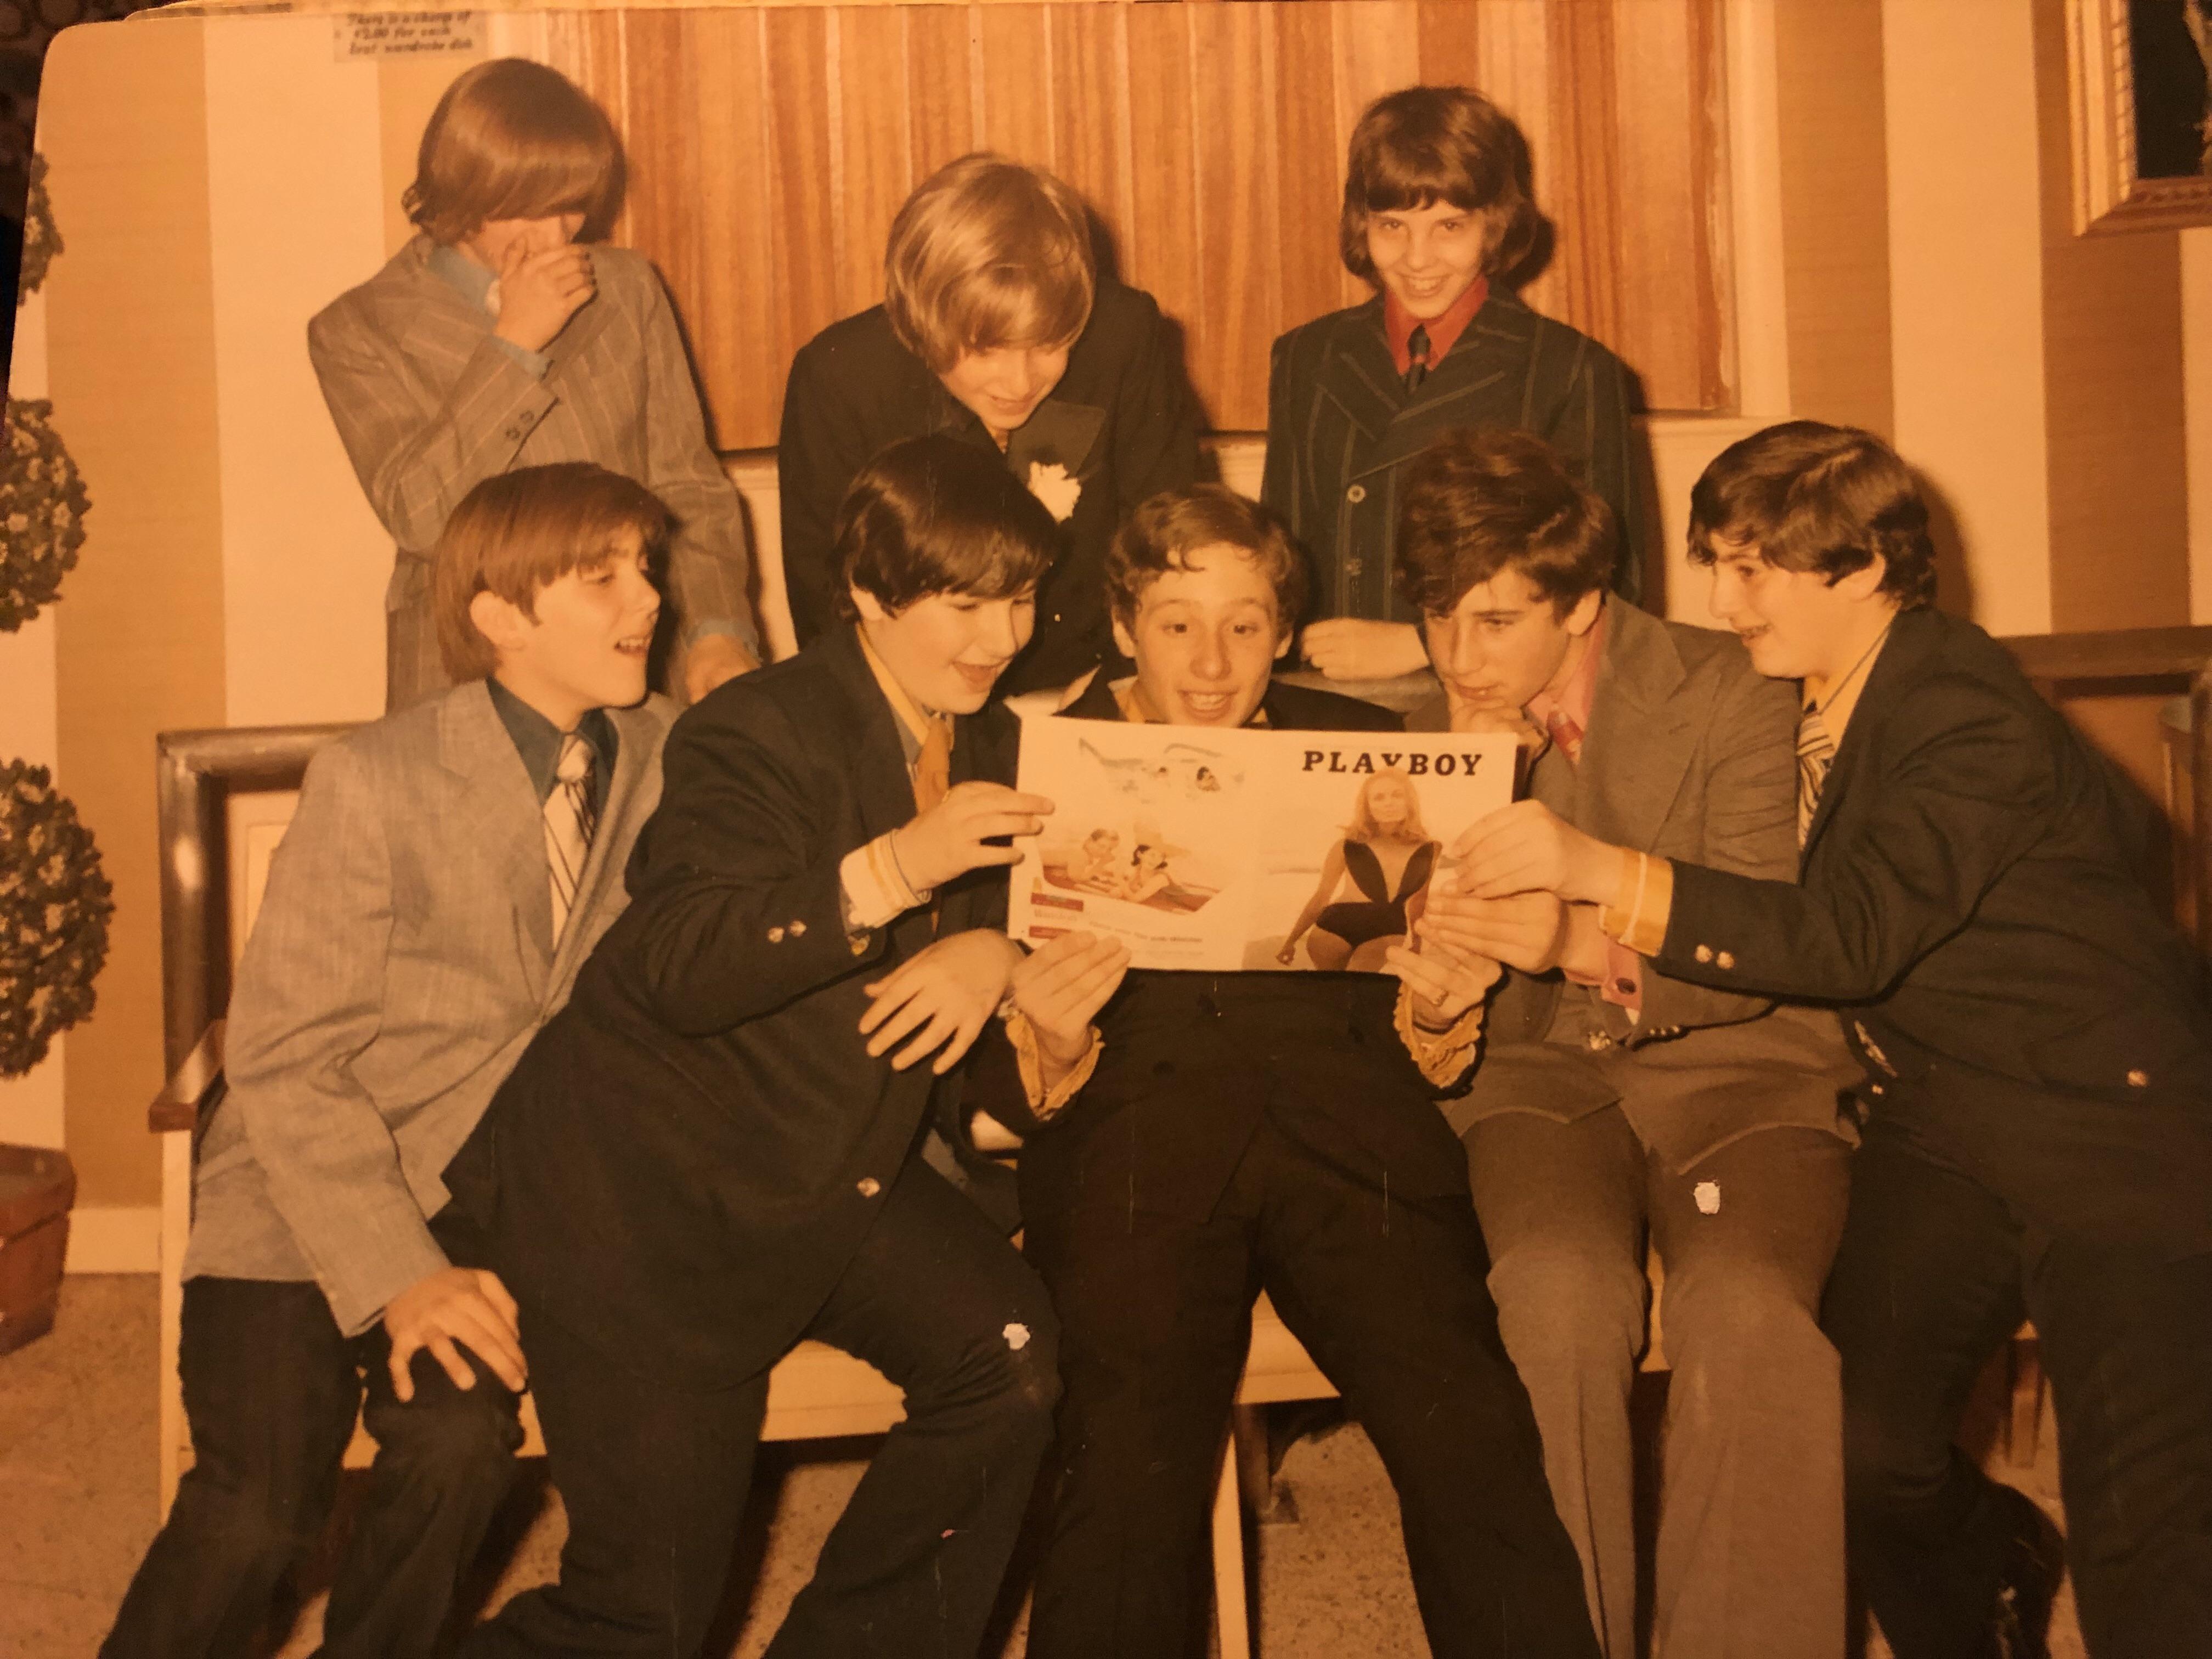 My dad (center, holding the Playboy) at his Bar Mitzvah, 1971.jpg